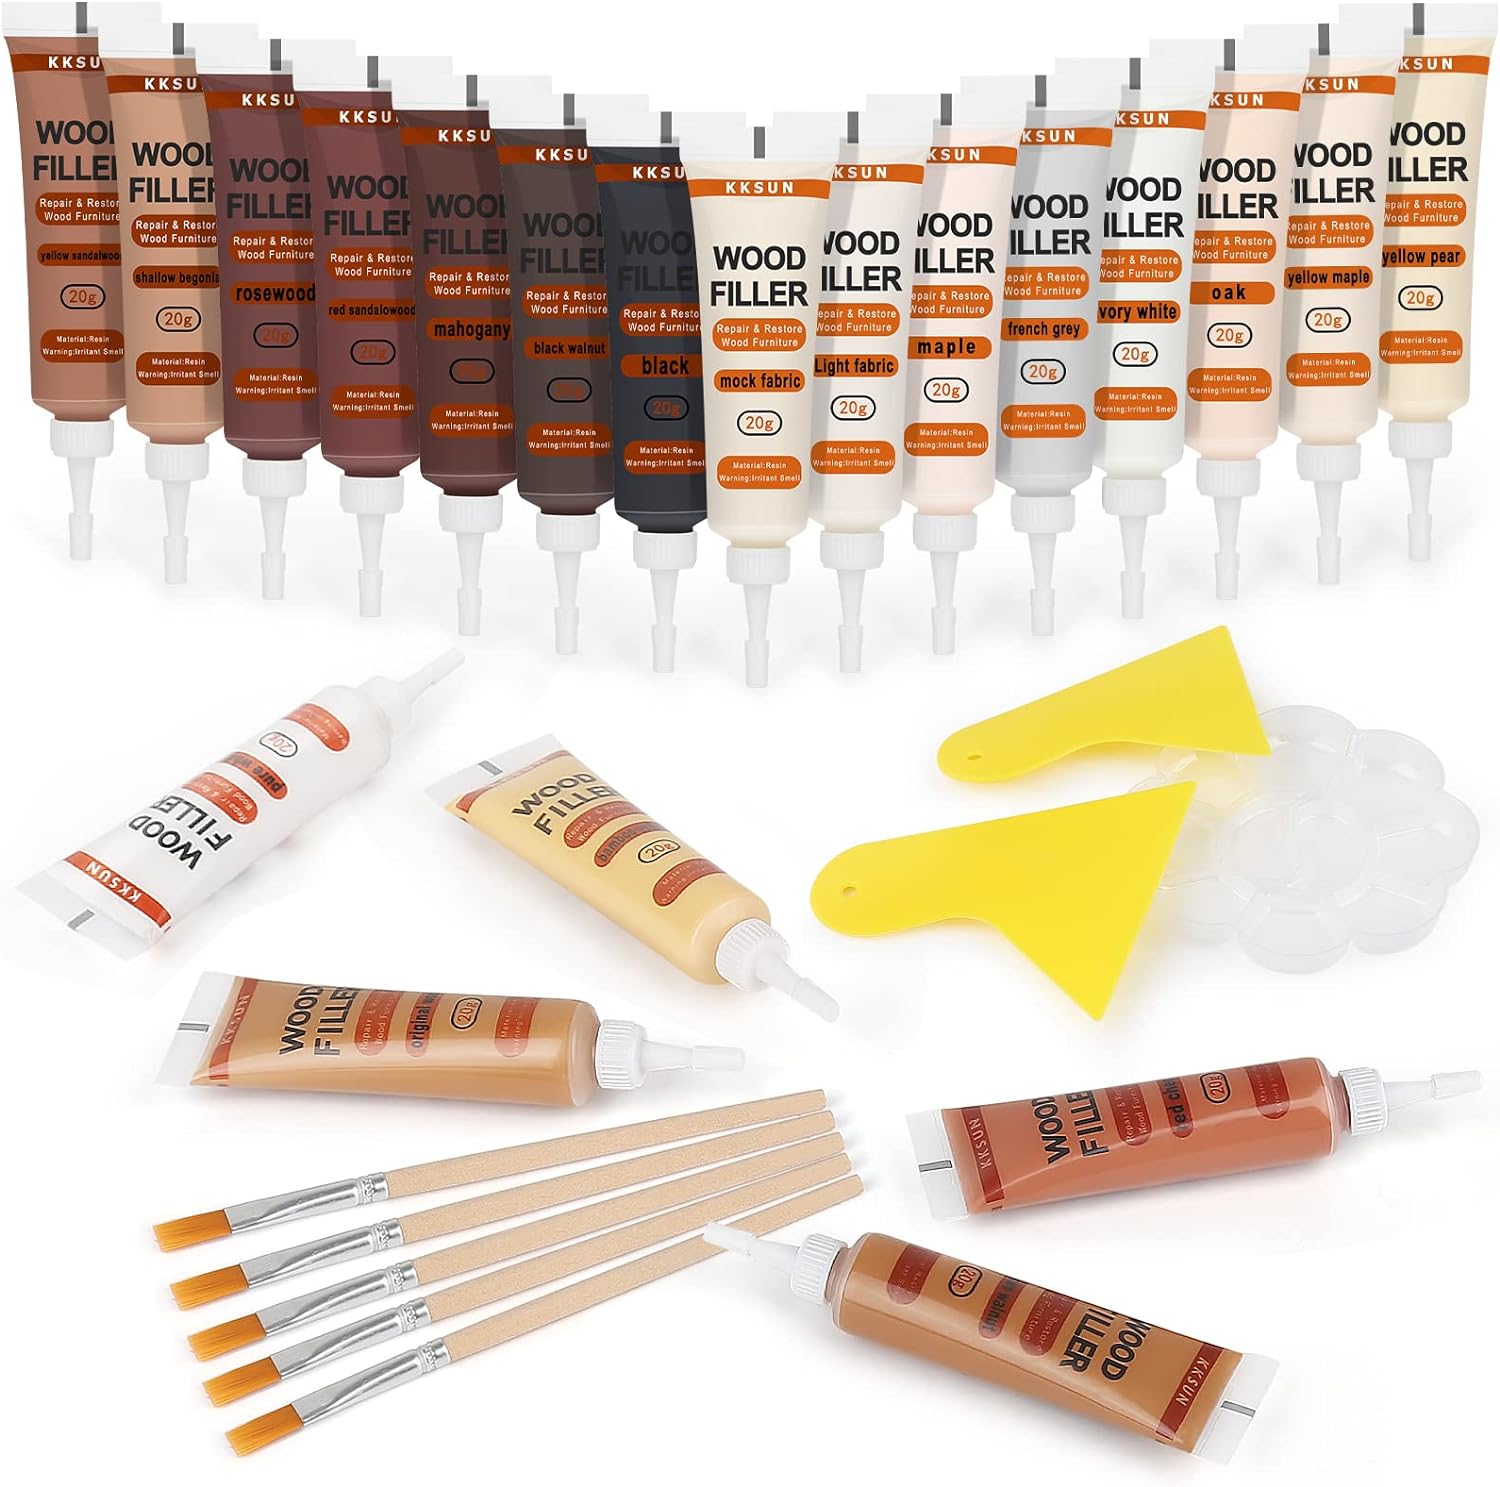 CHUKCHI Wood Furniture Repair Kit, 28 Piece Set Wood Filler Repair Kit Furniture Scratch Hole Restorer with Scraper, Brushes, Palette for Repairing Floors, Desks, Cabinets Covering Stains